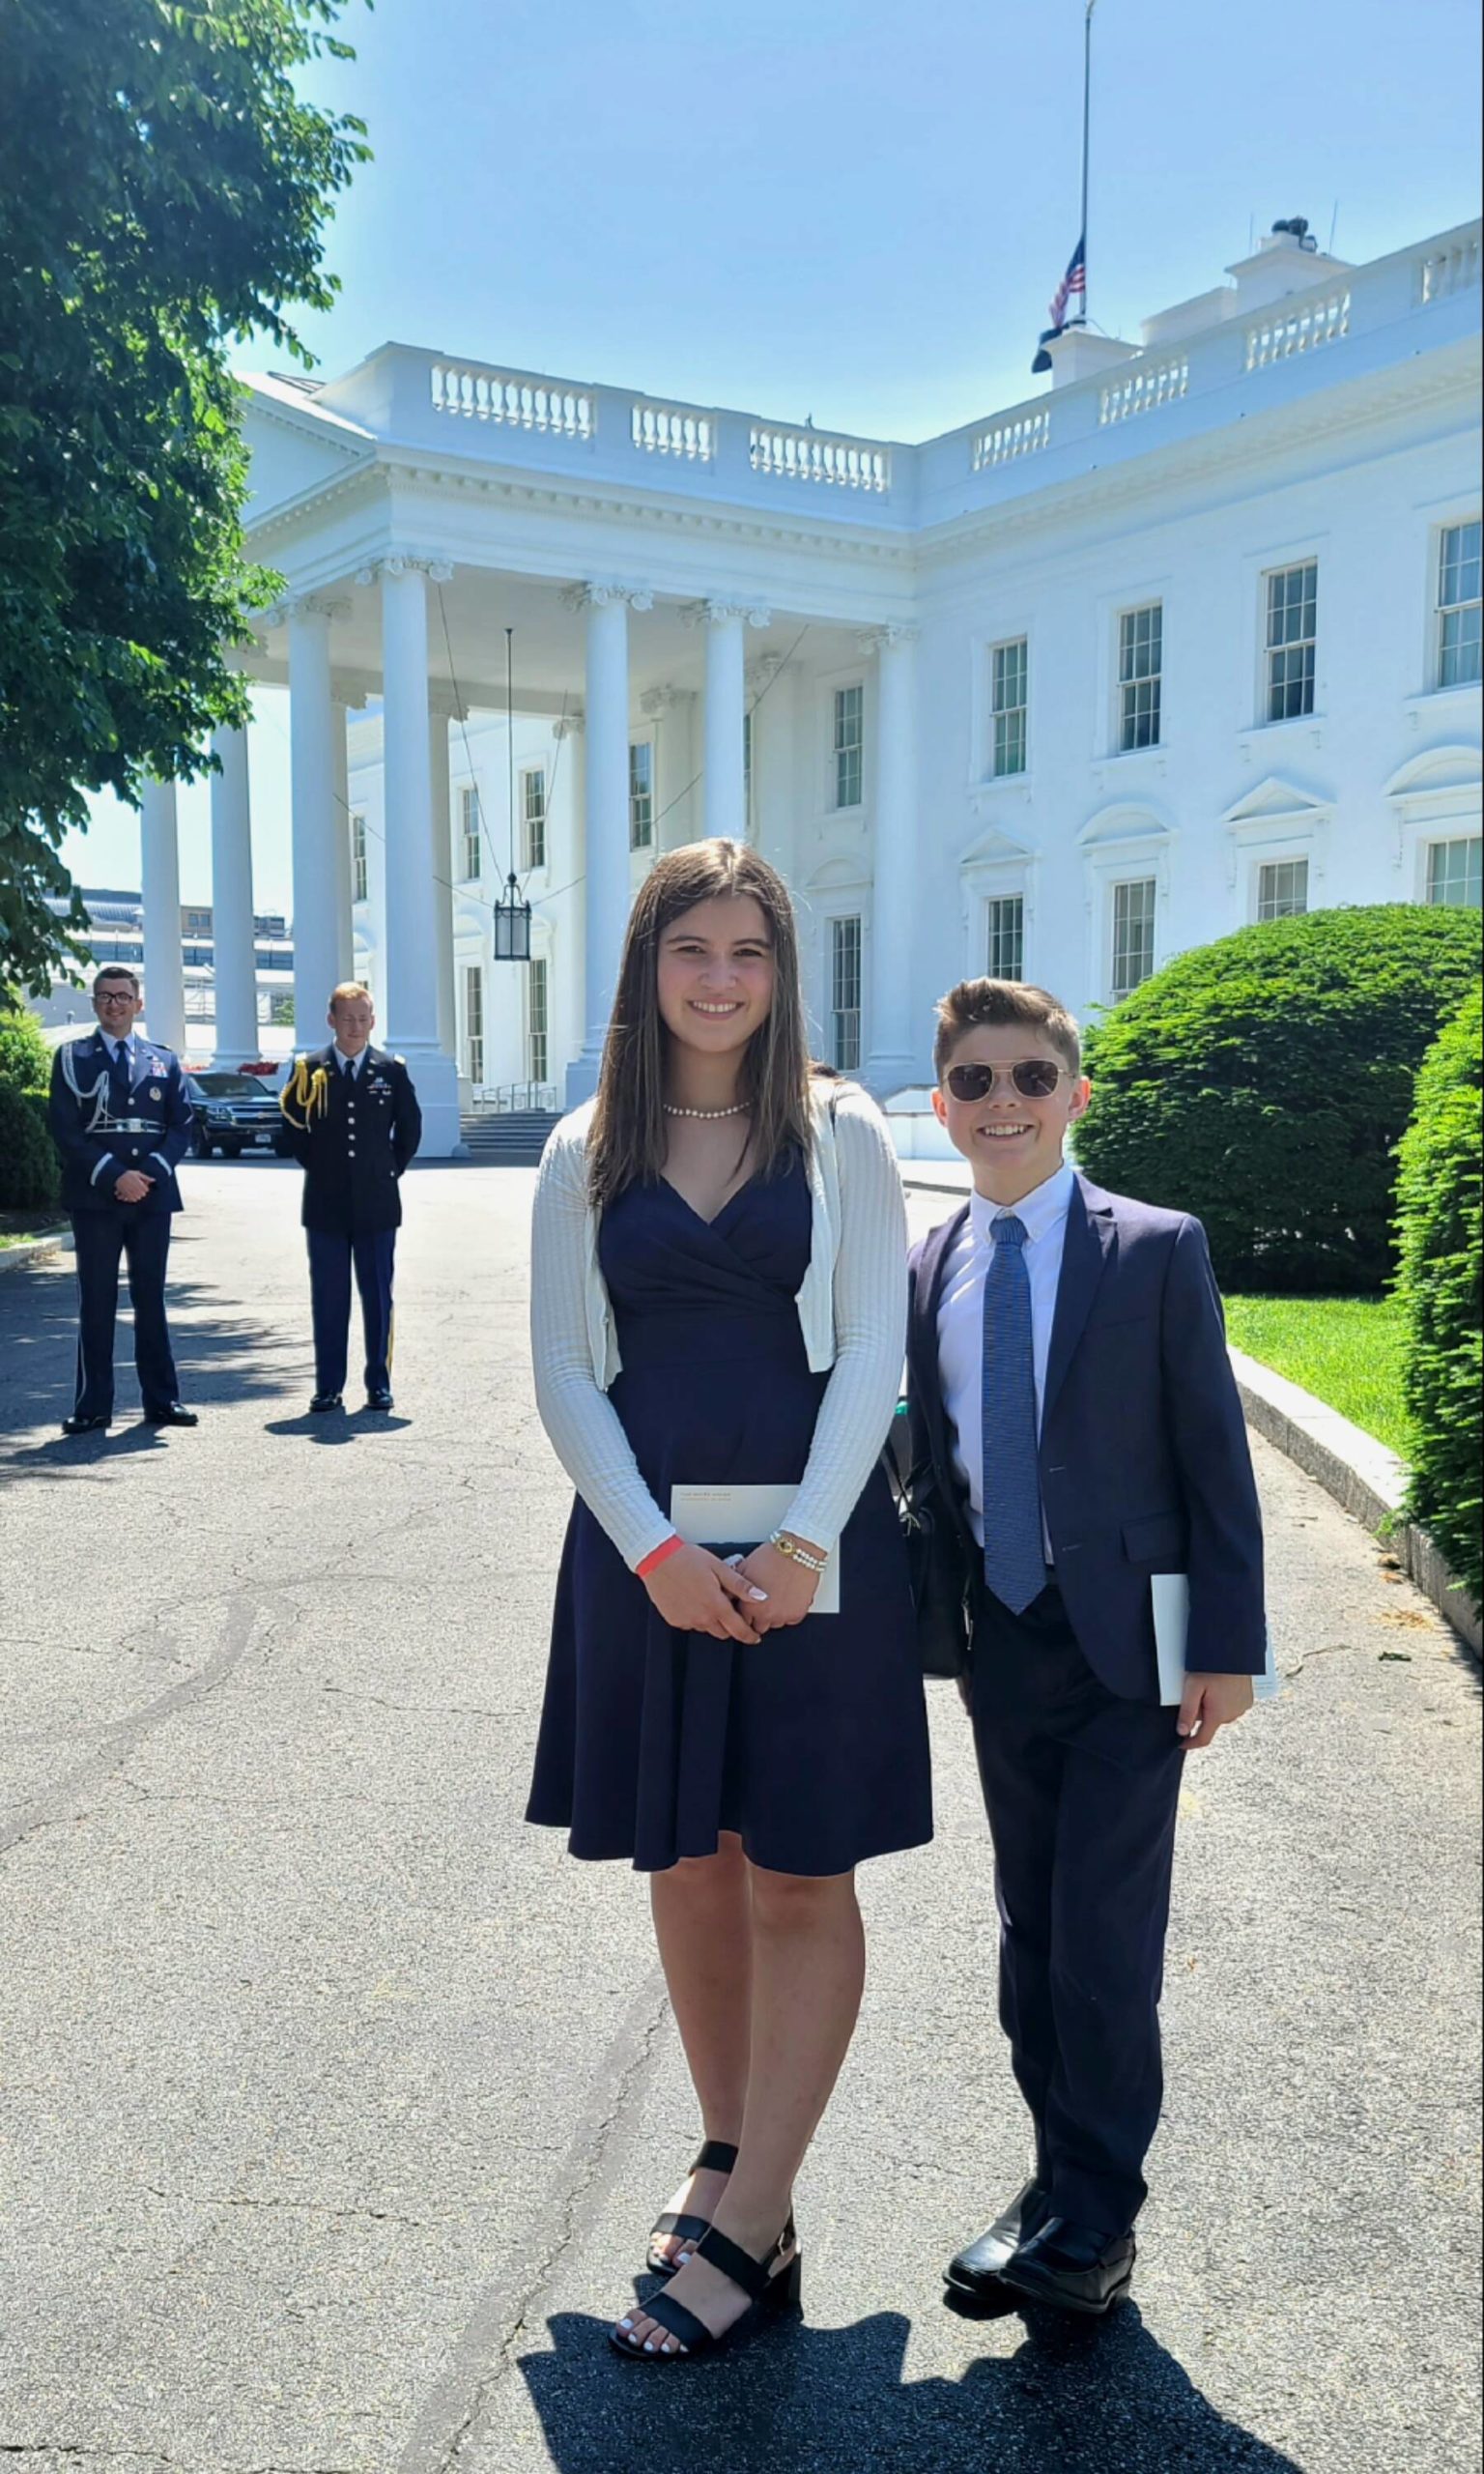 Addison and Jordon Newlove in front of the White House on Memorial Day 2022. Photo Courtesy of Kimberly Newlove.